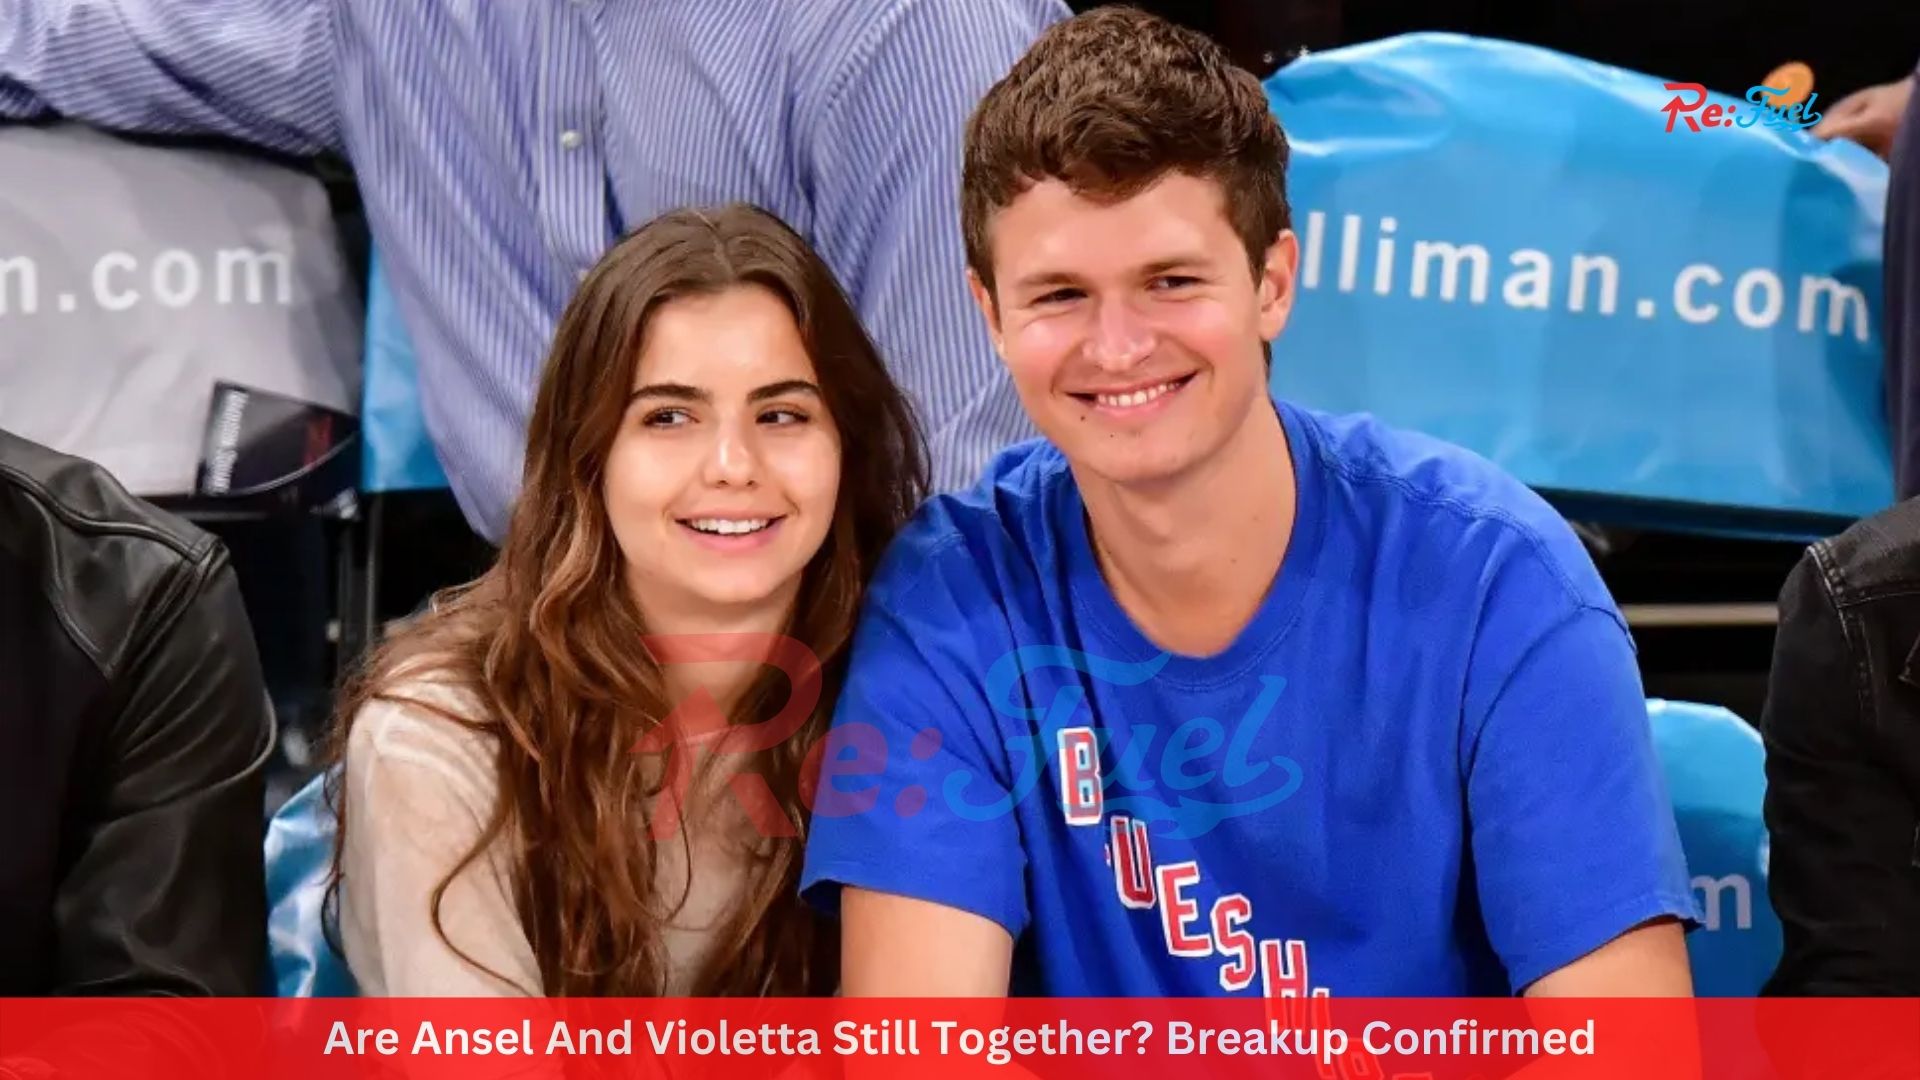 Are Ansel And Violetta Still Together? Breakup Confirmed